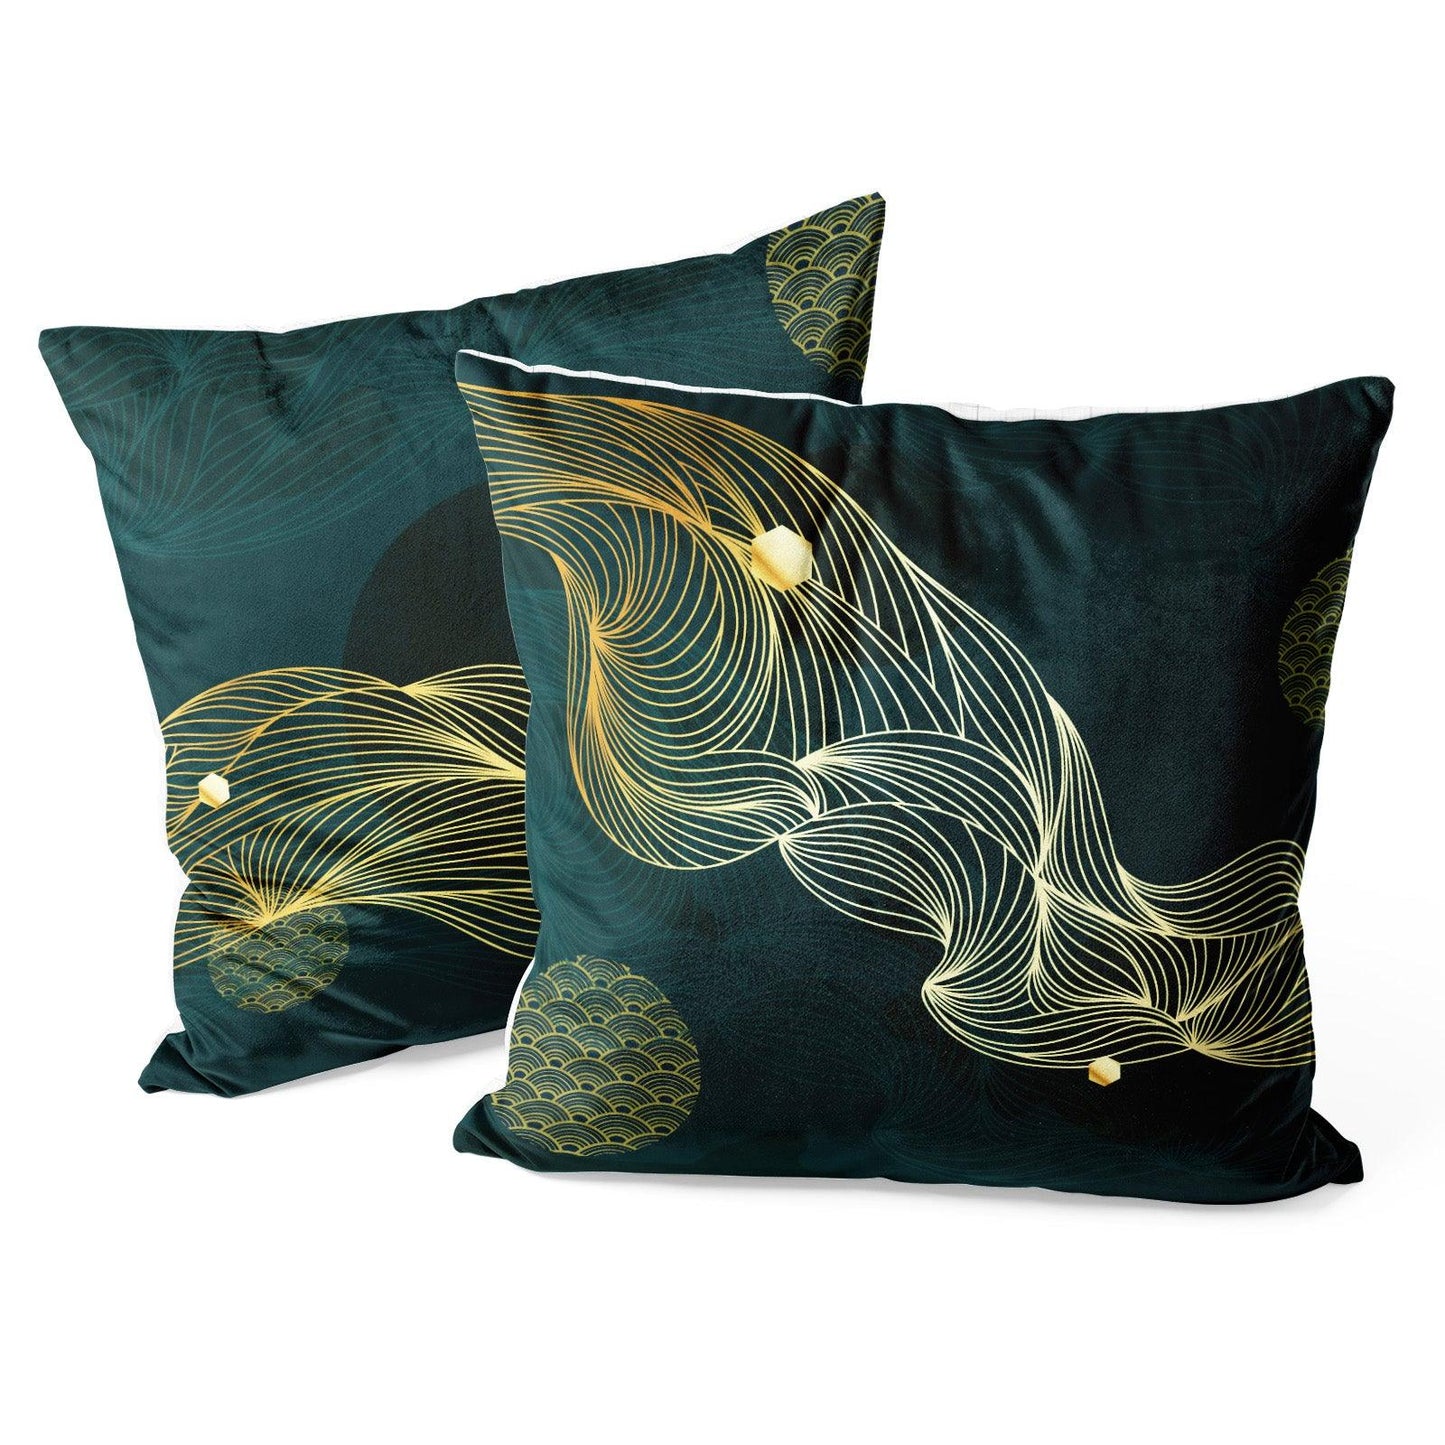 Marble Abstract Throw Pillow Covers Pack of 2 18x18 Inch (Gold Abstract Line) - Berkin Arts